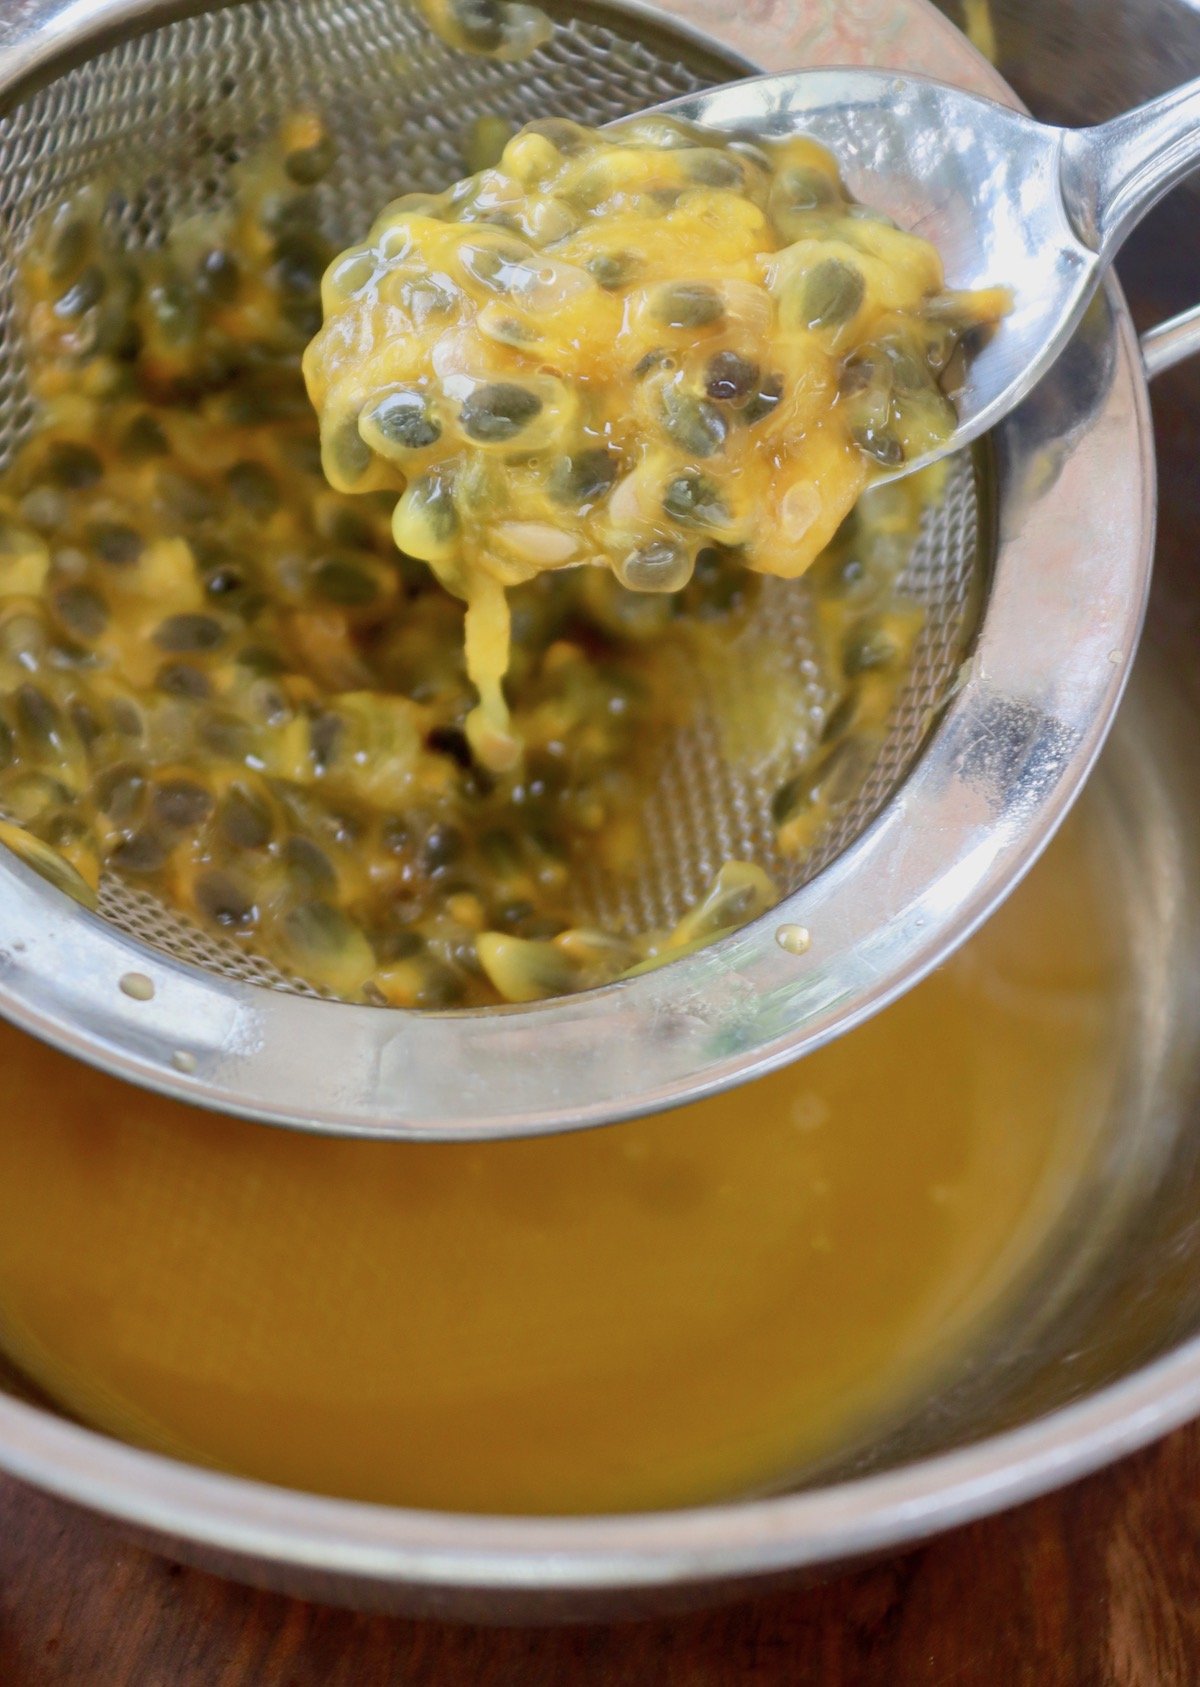 Passion fruit pulp with seeds in strainer over bowl of its juice.